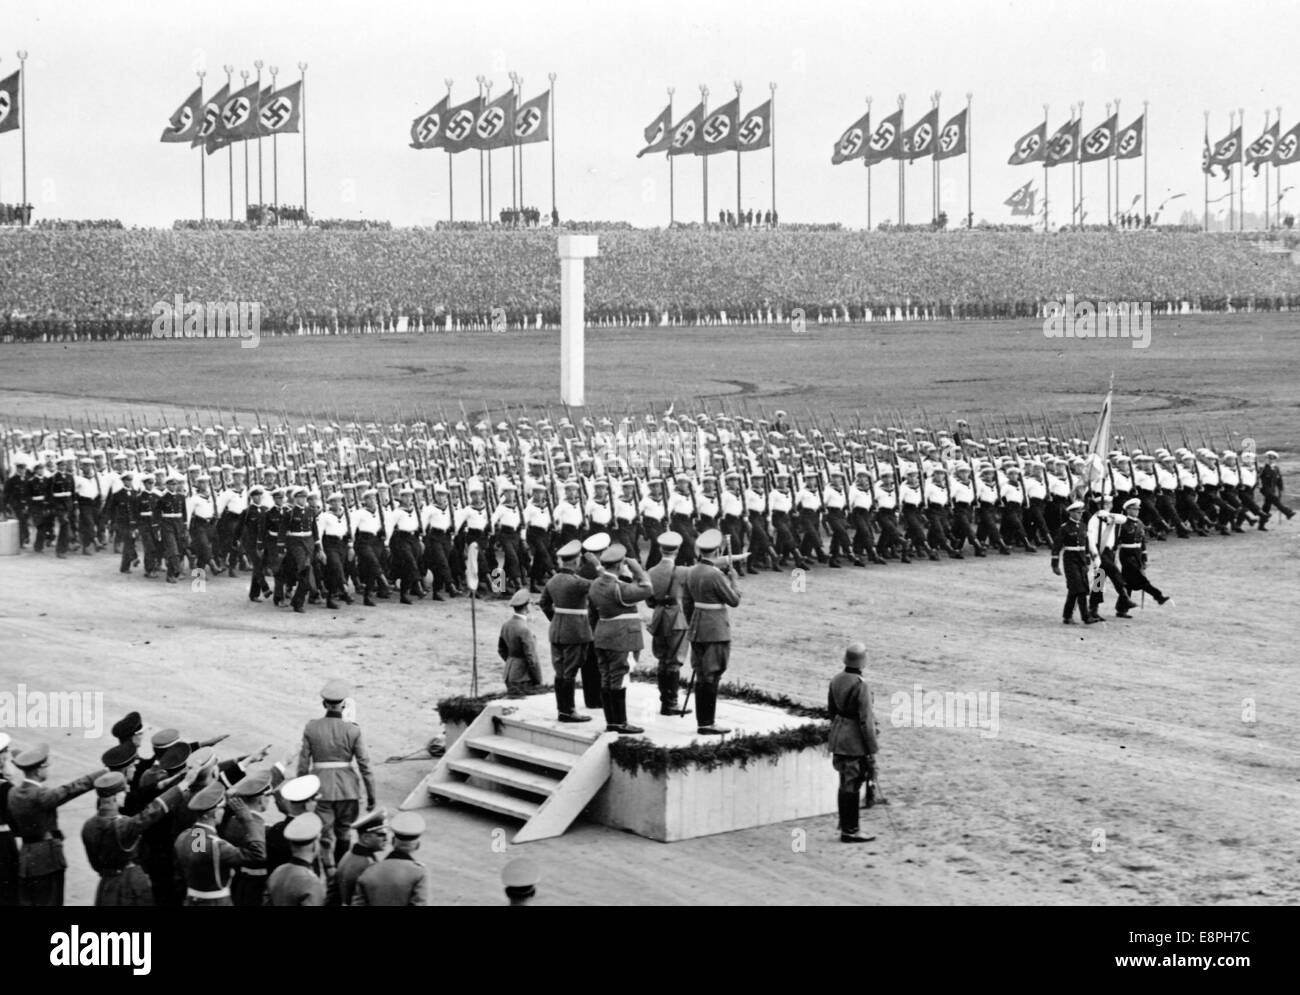 Nuremberg Rally 1937 in Nuremberg, Germany - Nazi party rally grounds - Demonstration by the German Wehrmacht (armed forces) on Zeppelin Field, here the Navy's non-commissioned officer training course marches past Adolf Hitler. To the right of Hitler: Field Marshal Werner von Blomberg. Behind them: The commanders of the three Wehrmacht branches Grand Admiral Erich Raeder, Colonel General Freiherr Werner von Fritsch and Colonel General Hermann Goering. Flaws in quality due to the historic picture copy) Fotoarchiv für Zeitgeschichtee - NO WIRE SERVICE - Stock Photo